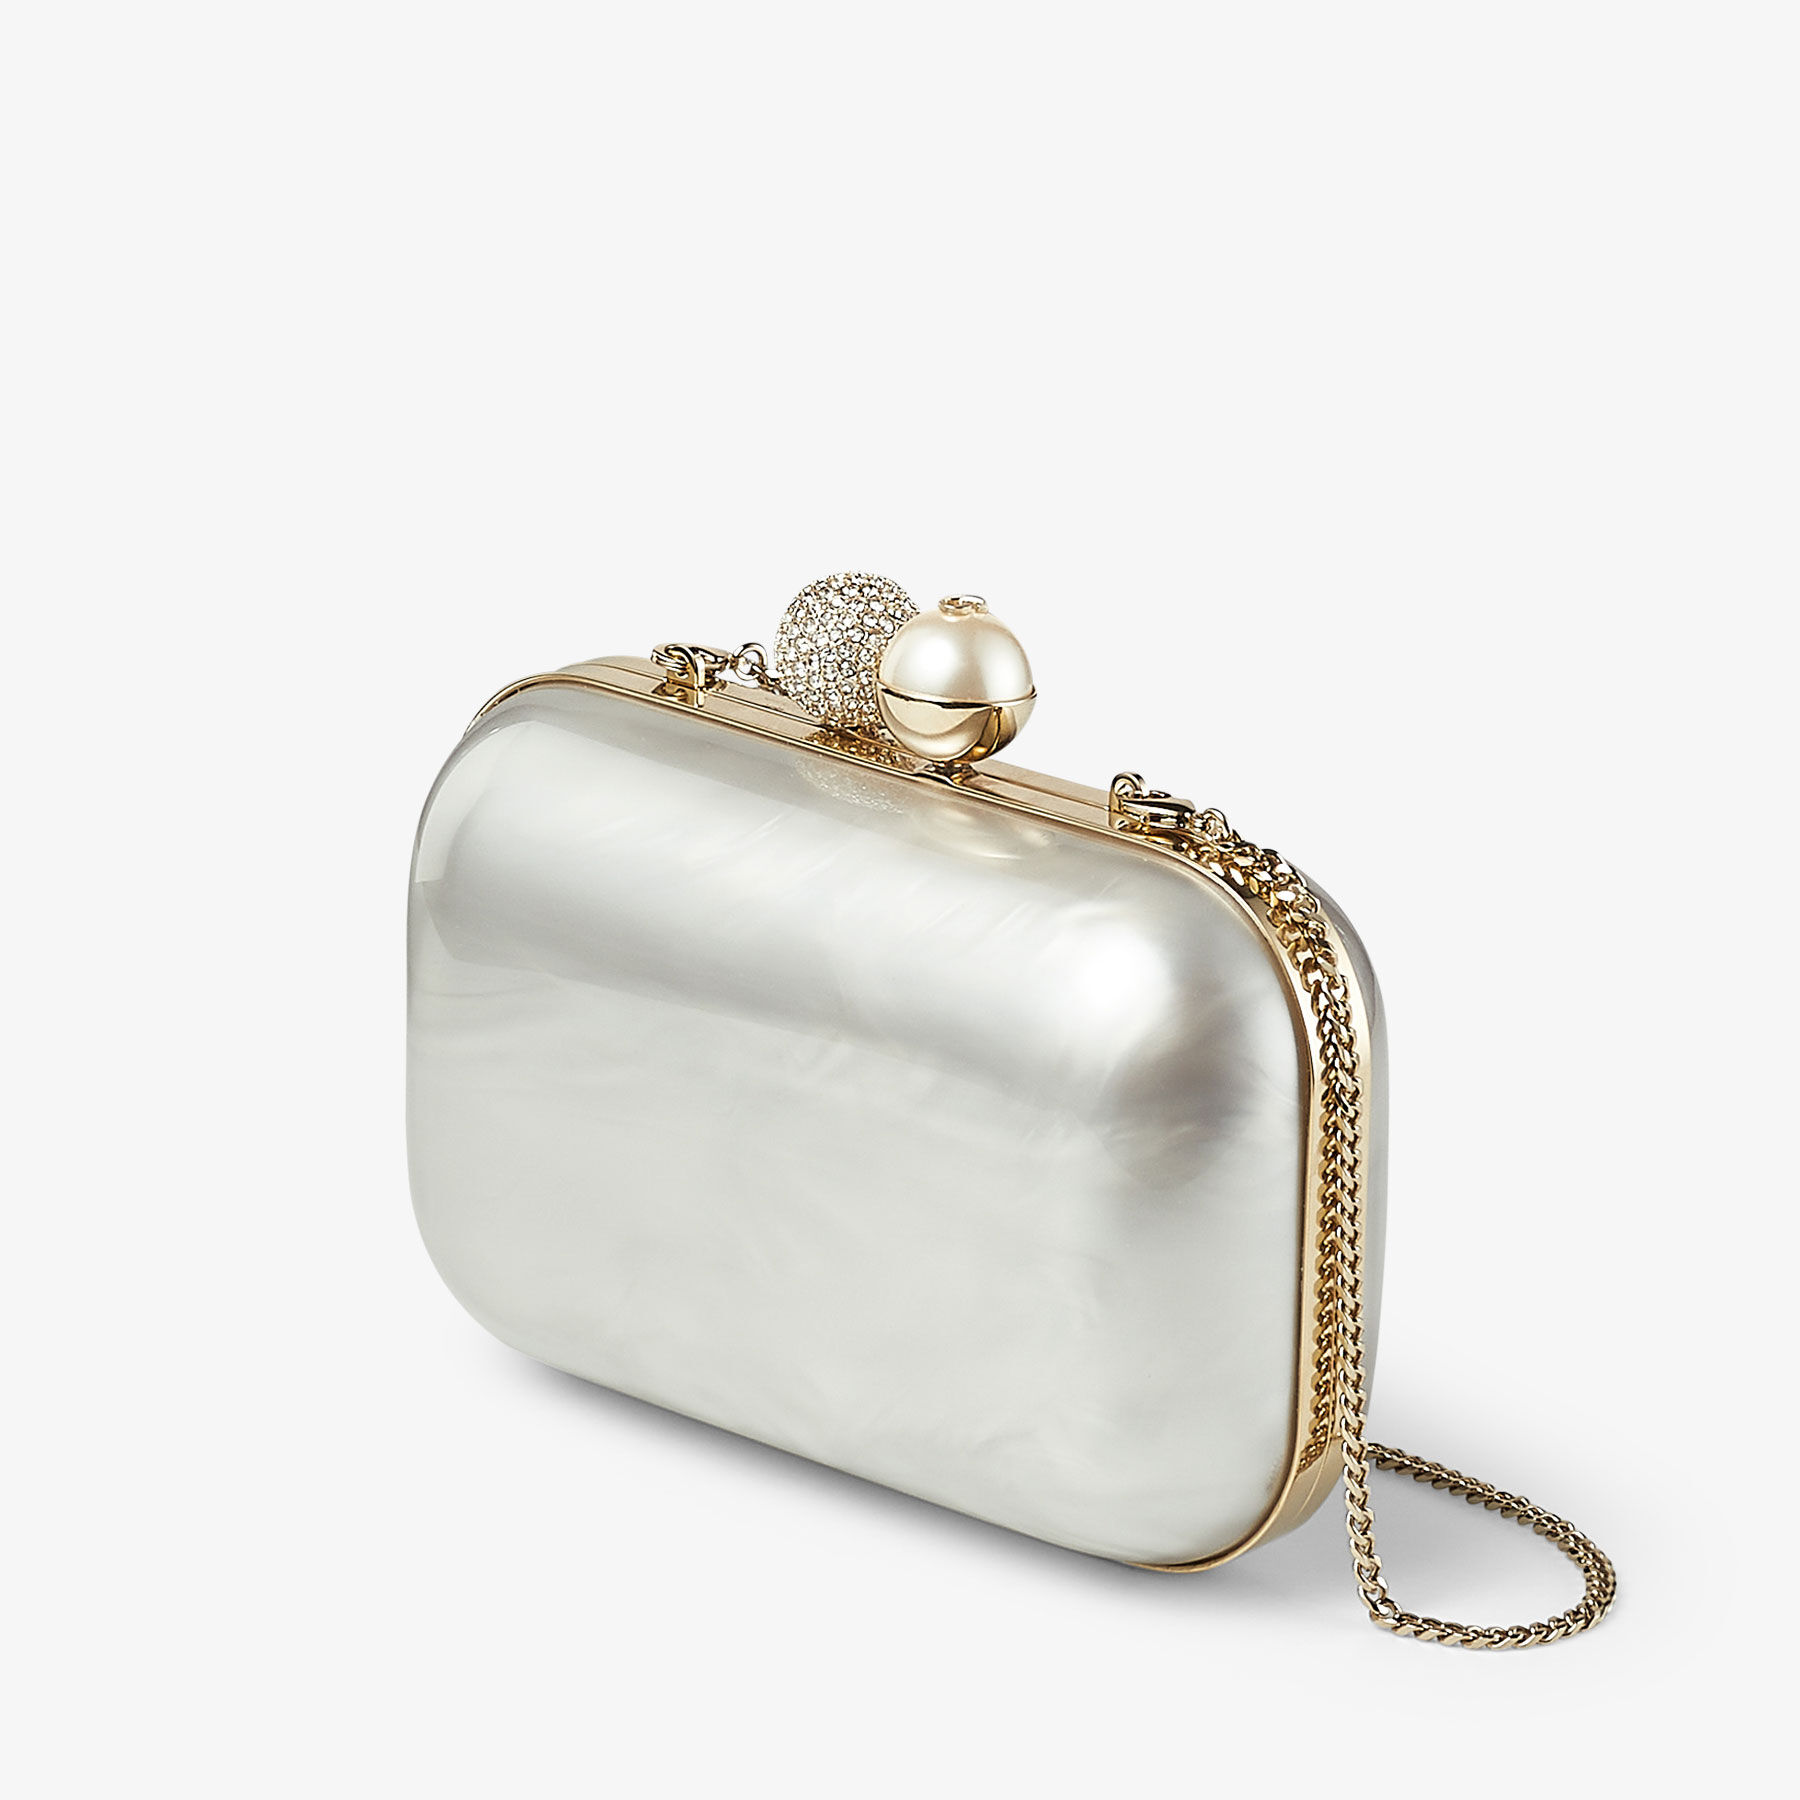 Brass Mother Of Pearl Clutch Bag at Best Price India